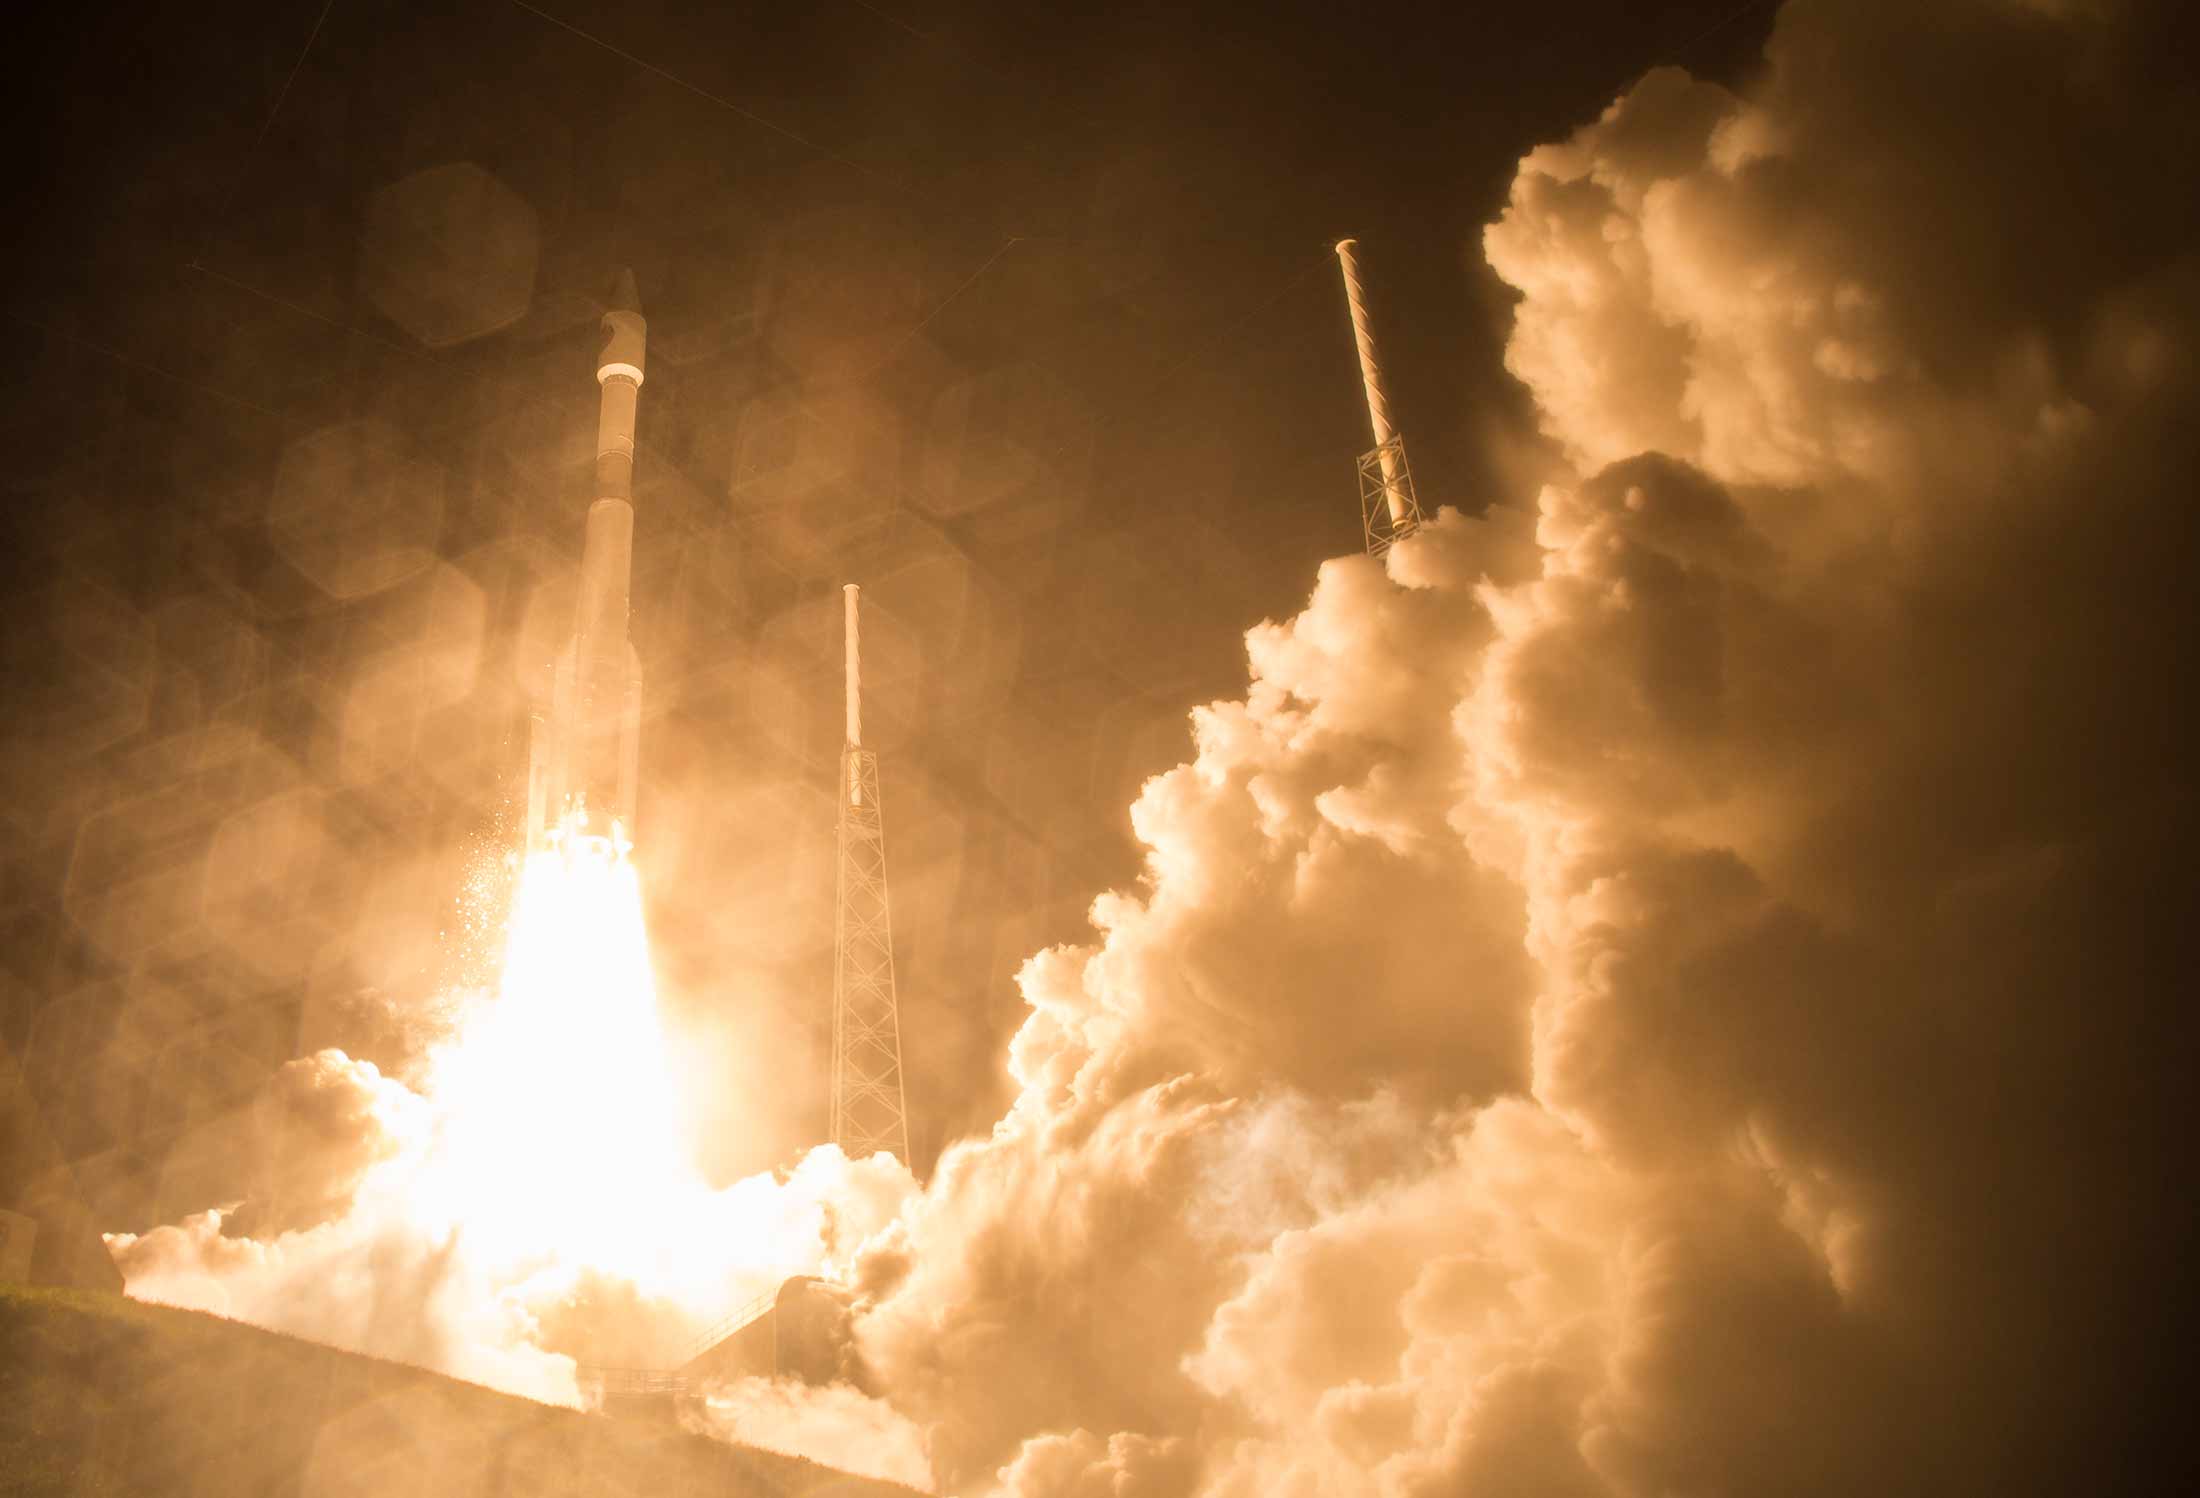 The United Launch Alliance Atlas V rocket with NASA’s Magnetospheric Multiscale (MMS) spacecraft onboard launches from the Cape Canaveral Air Force Station Space Launch Complex 41, Thursday, March 12, 2015, Florida.
